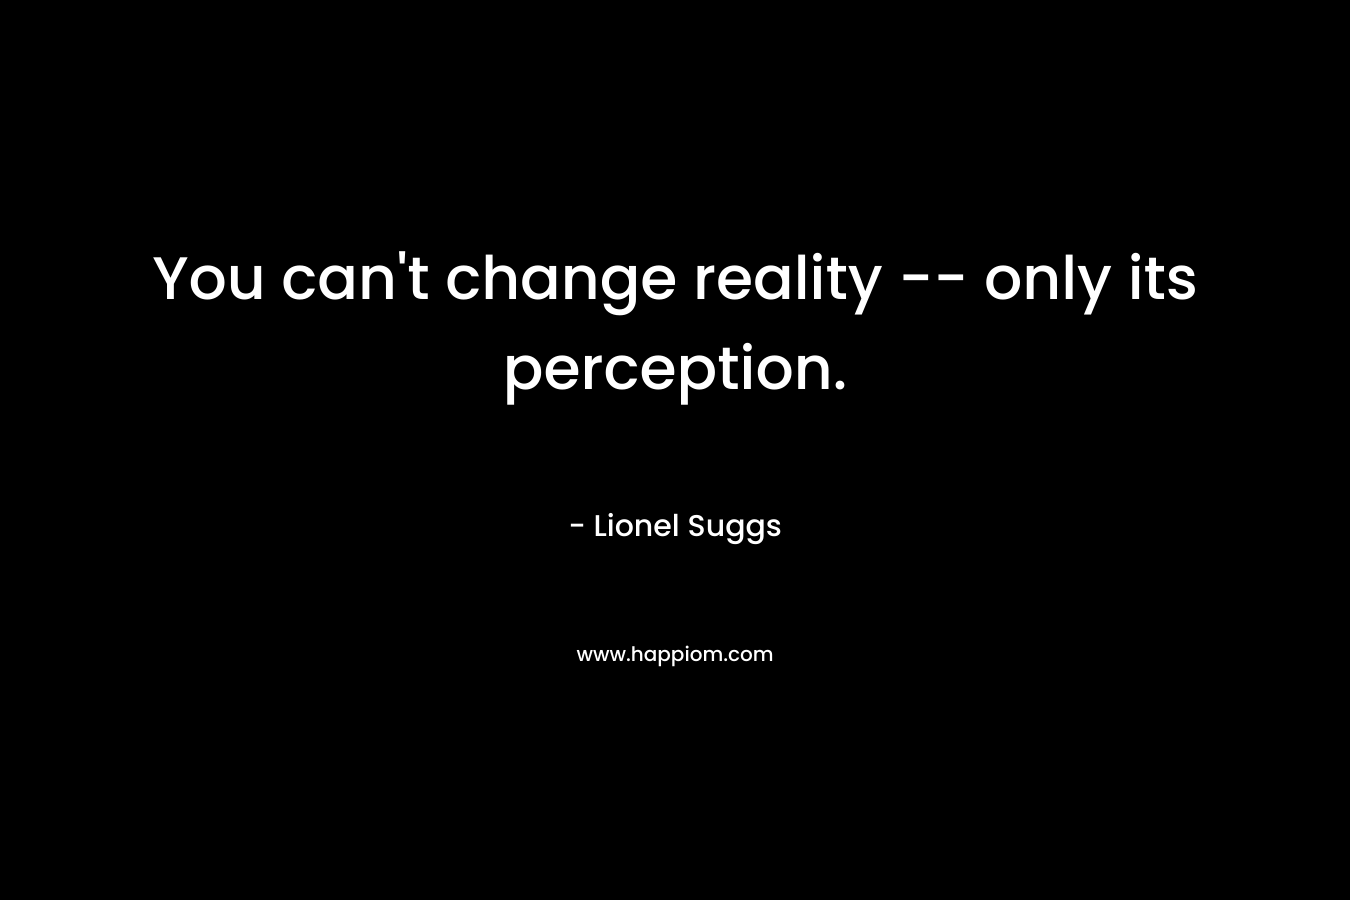 You can't change reality -- only its perception.